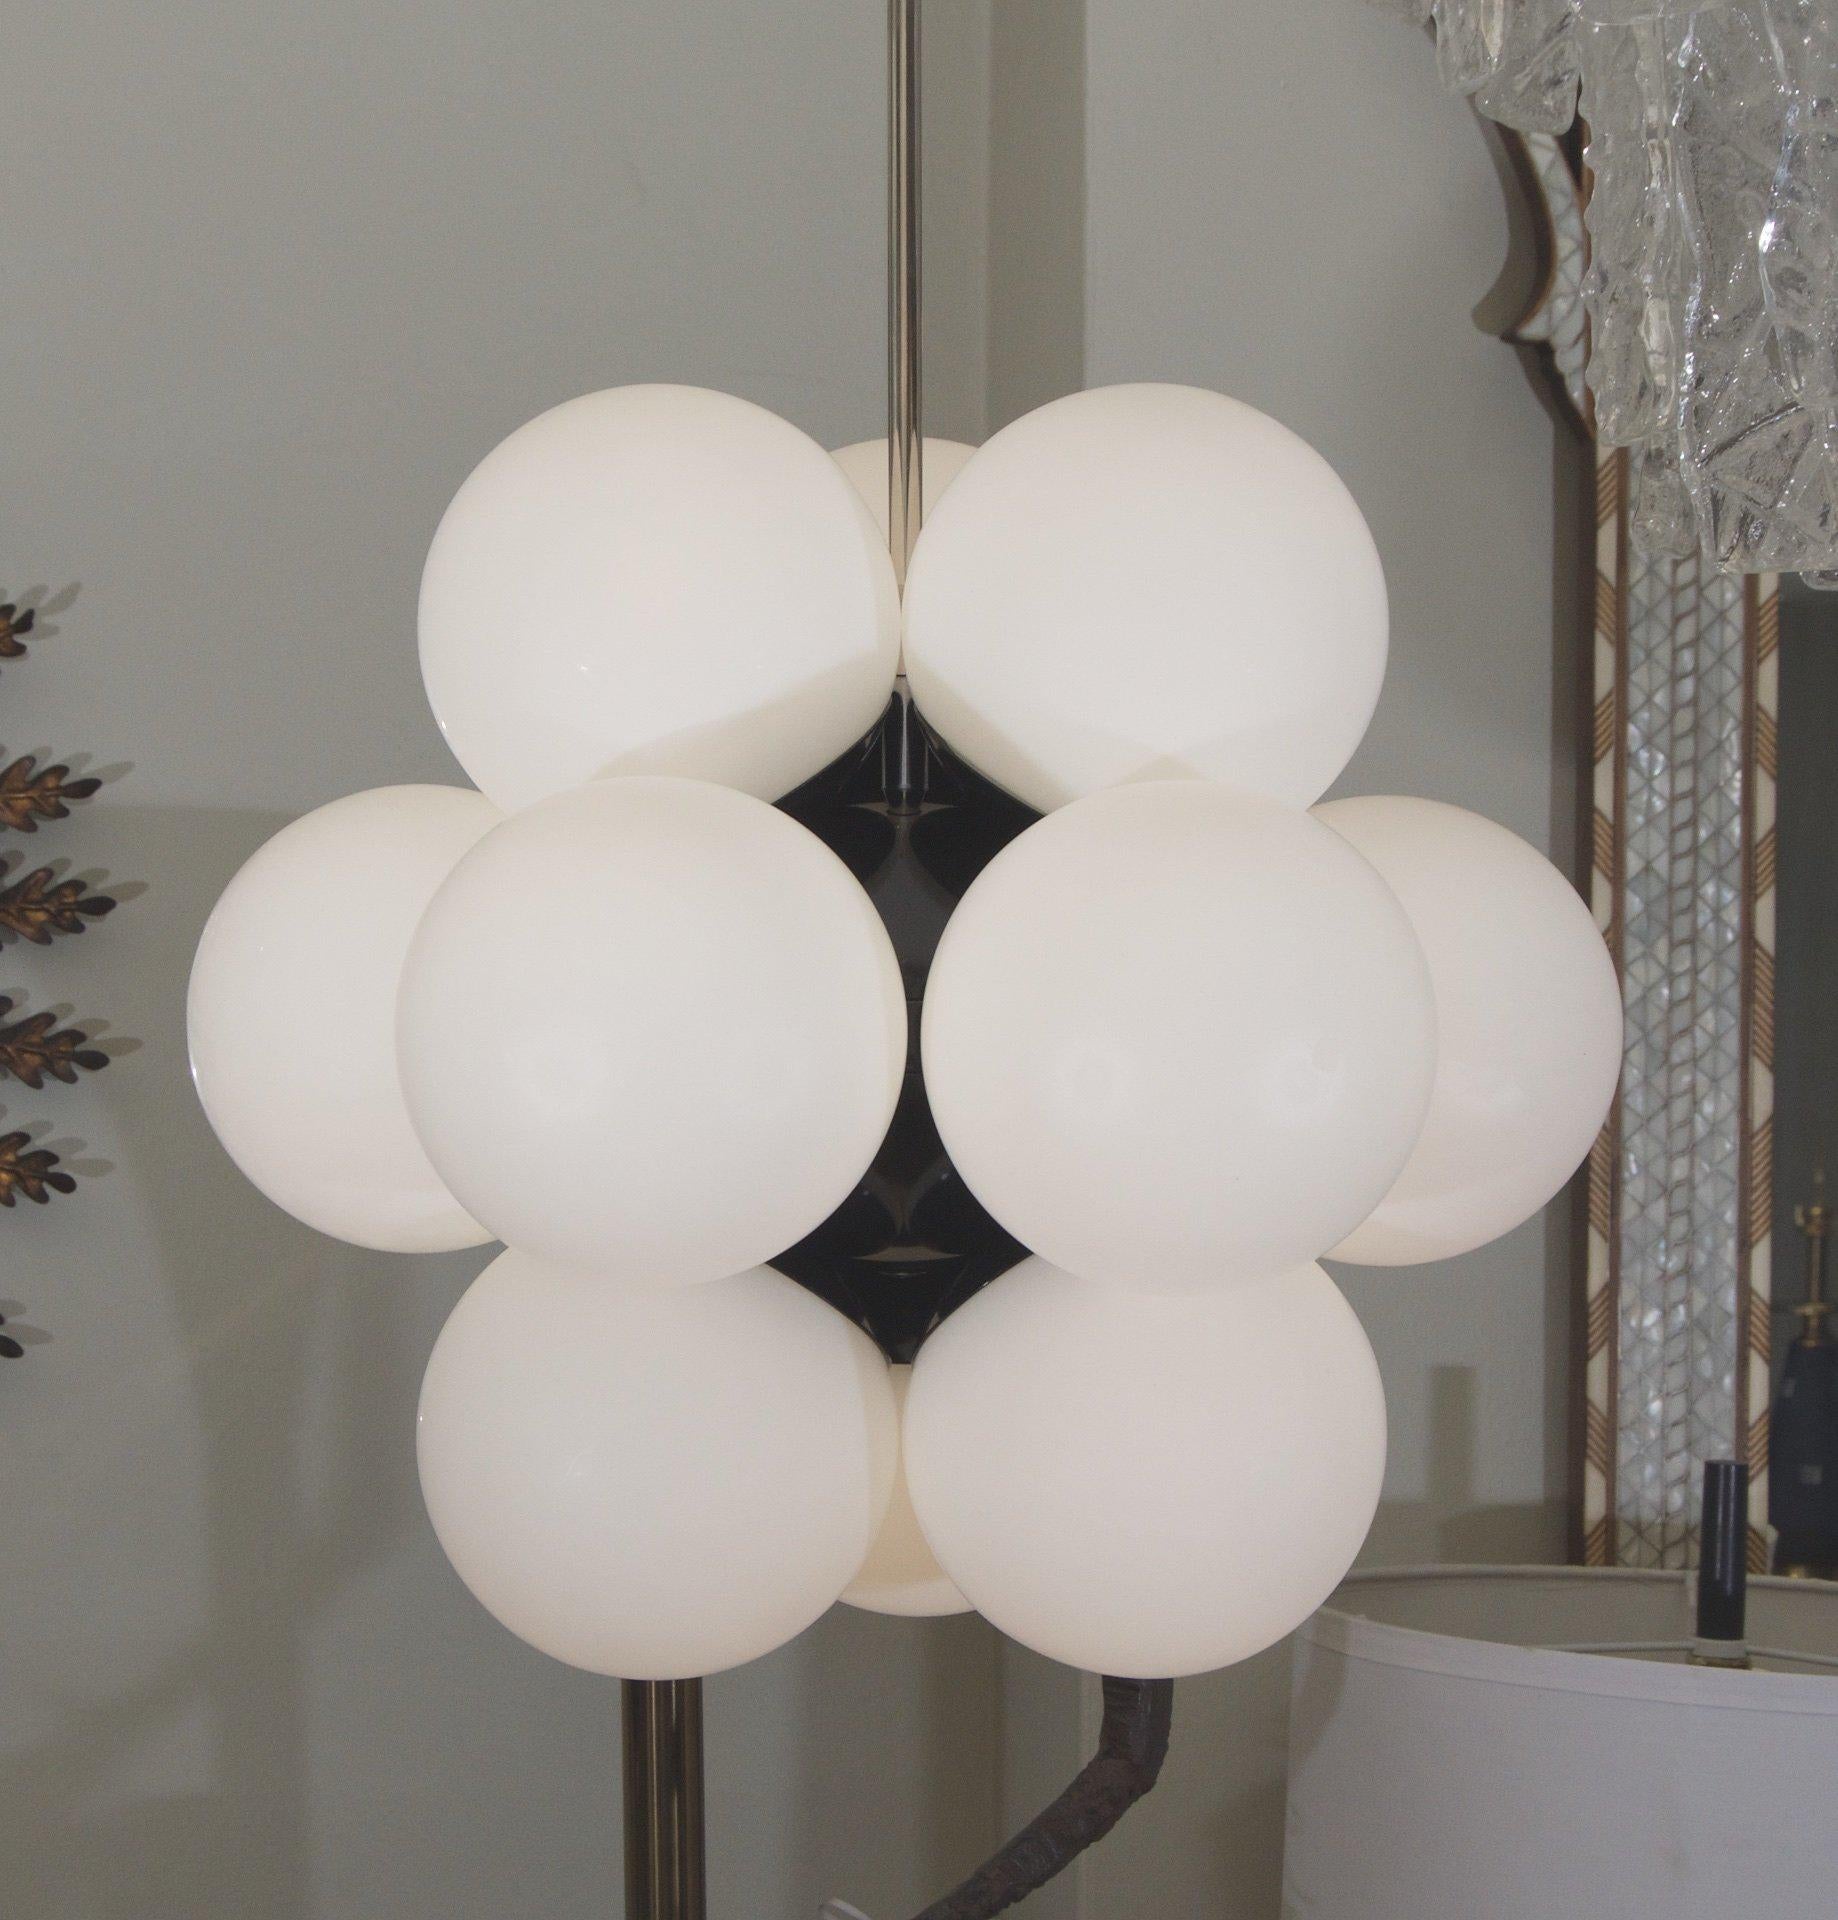 Kaiser Leuchten
Germany, 1970s

Gorgeous Kaiser chandelier with a molecular structure, much more dense visually than comparable Sputnik form chandeliers. Gloss black enamel central body is surround by 12 closely attached opal globes.

Takes 12